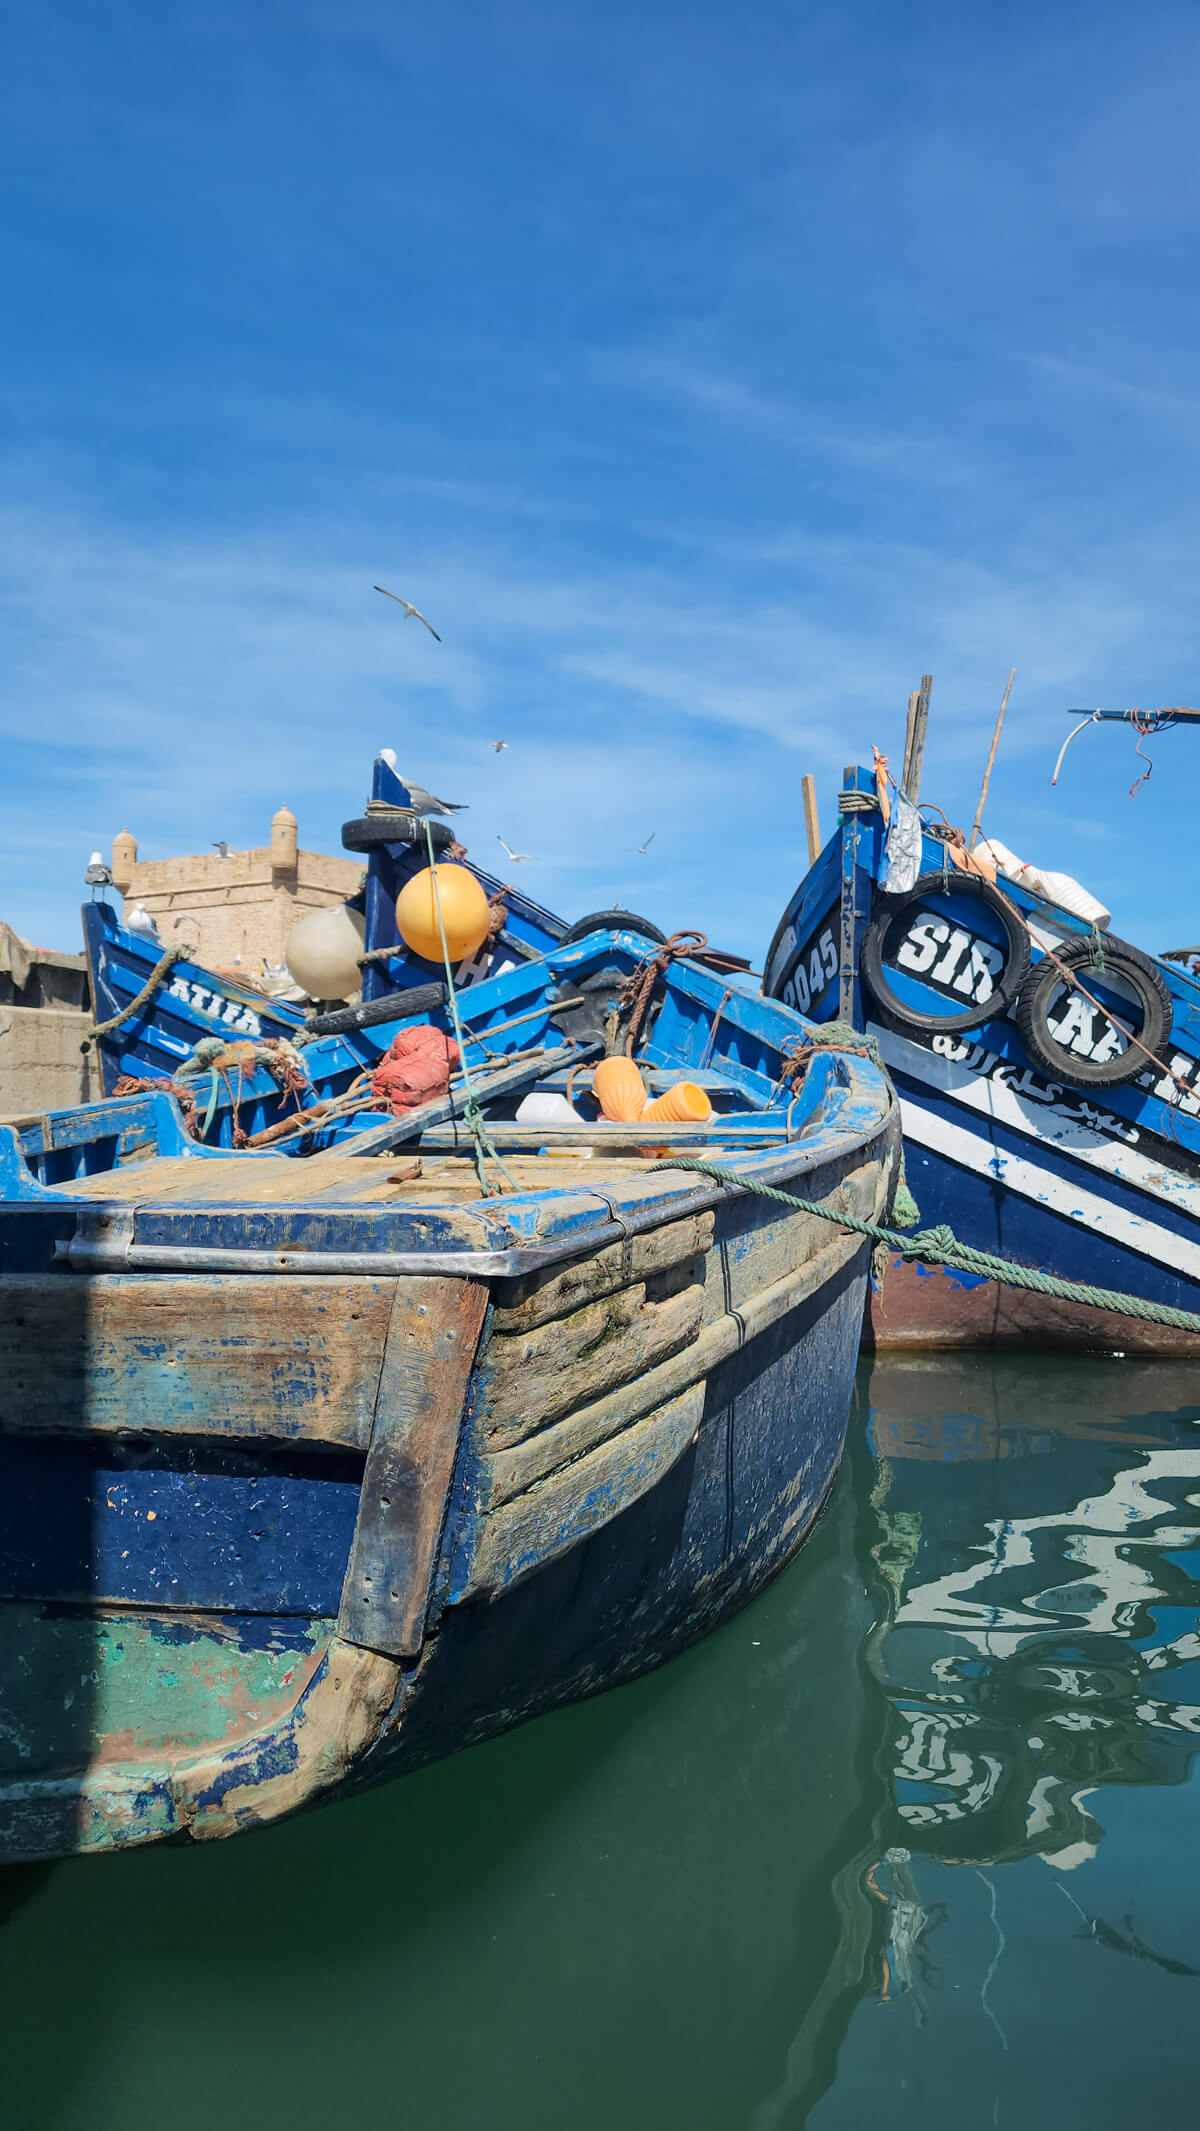 Featured image for “Day Trip to Essaouira from Marrakech”